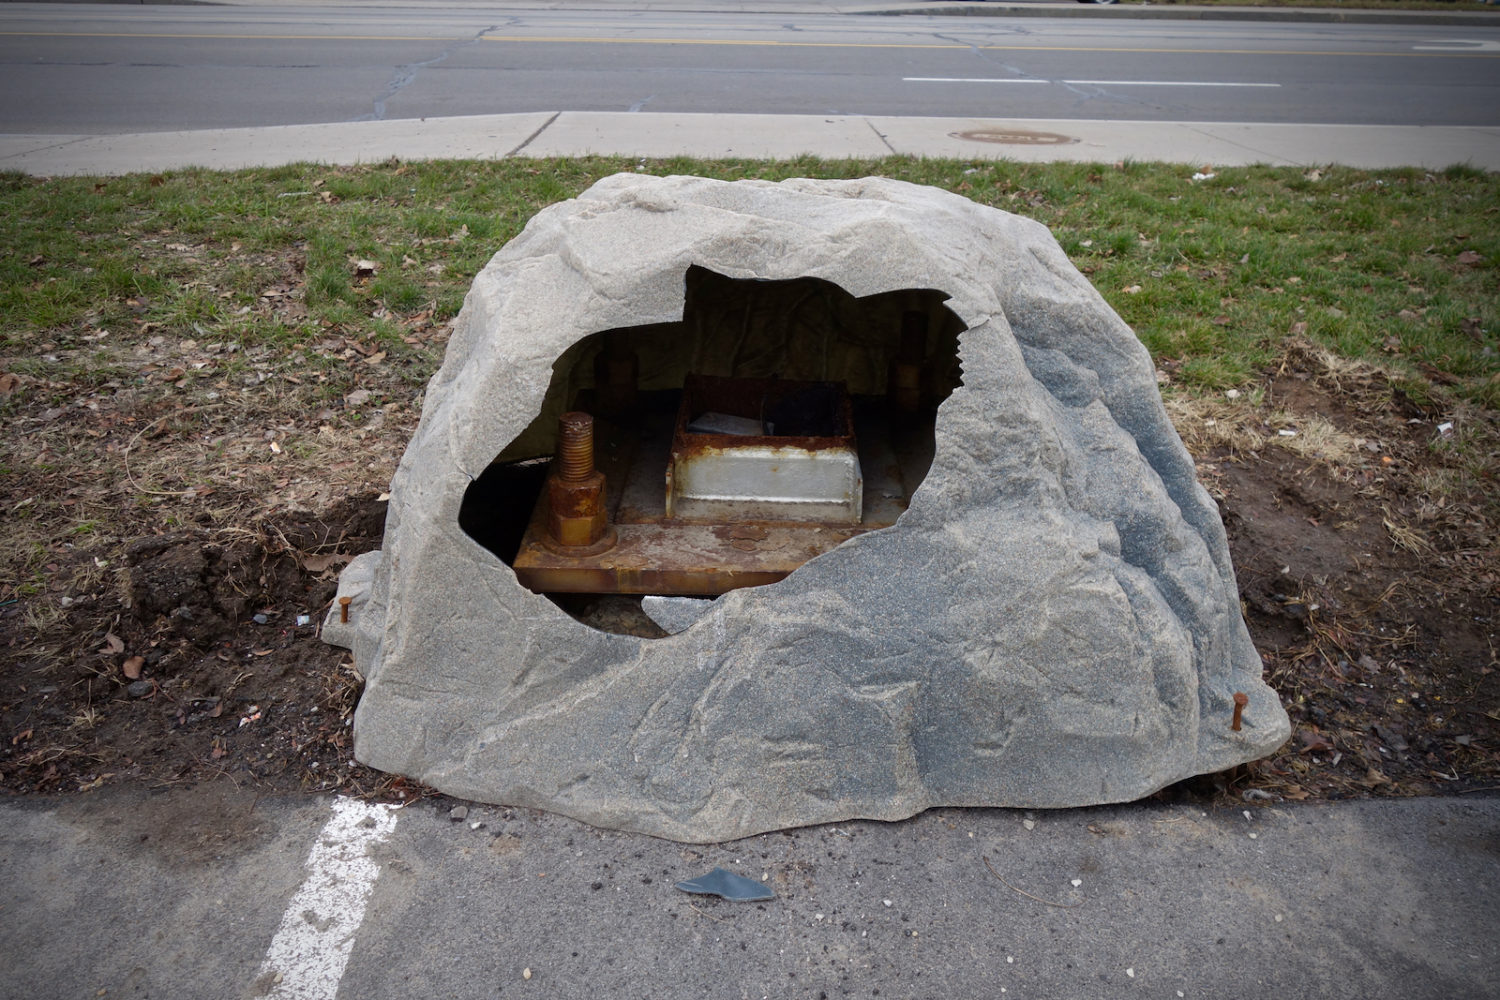 One of the local wonders of the world, this broken, fake rock, hiding some mysterious machinery, formerly nailed to a surface and now sitting in a parking lot near Starbucks on East Ridge Road.